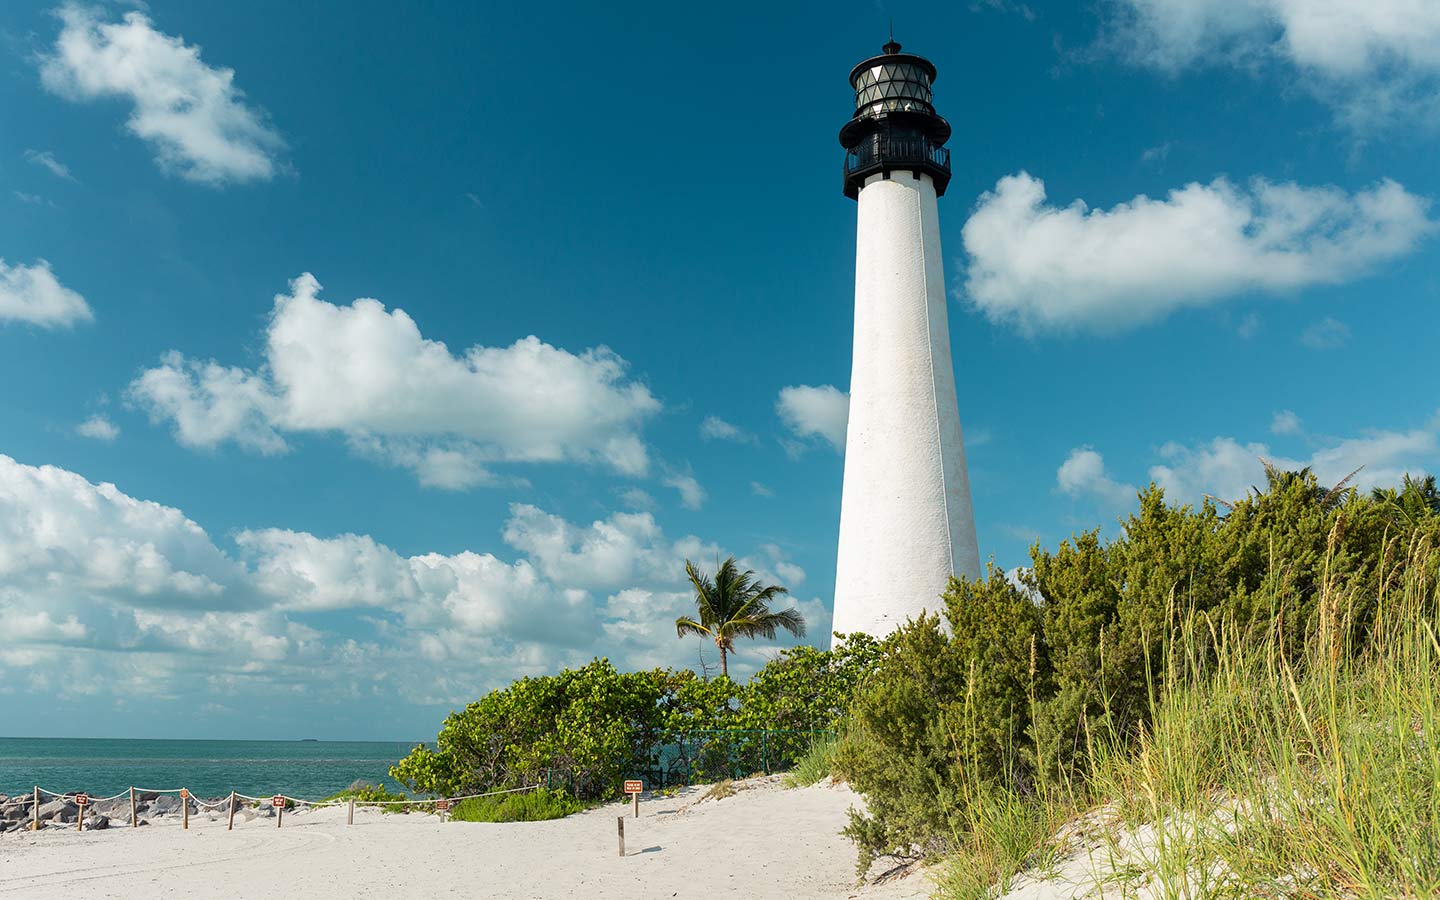 View of Bill Baggs Cape Florida Lighthouse from beach below